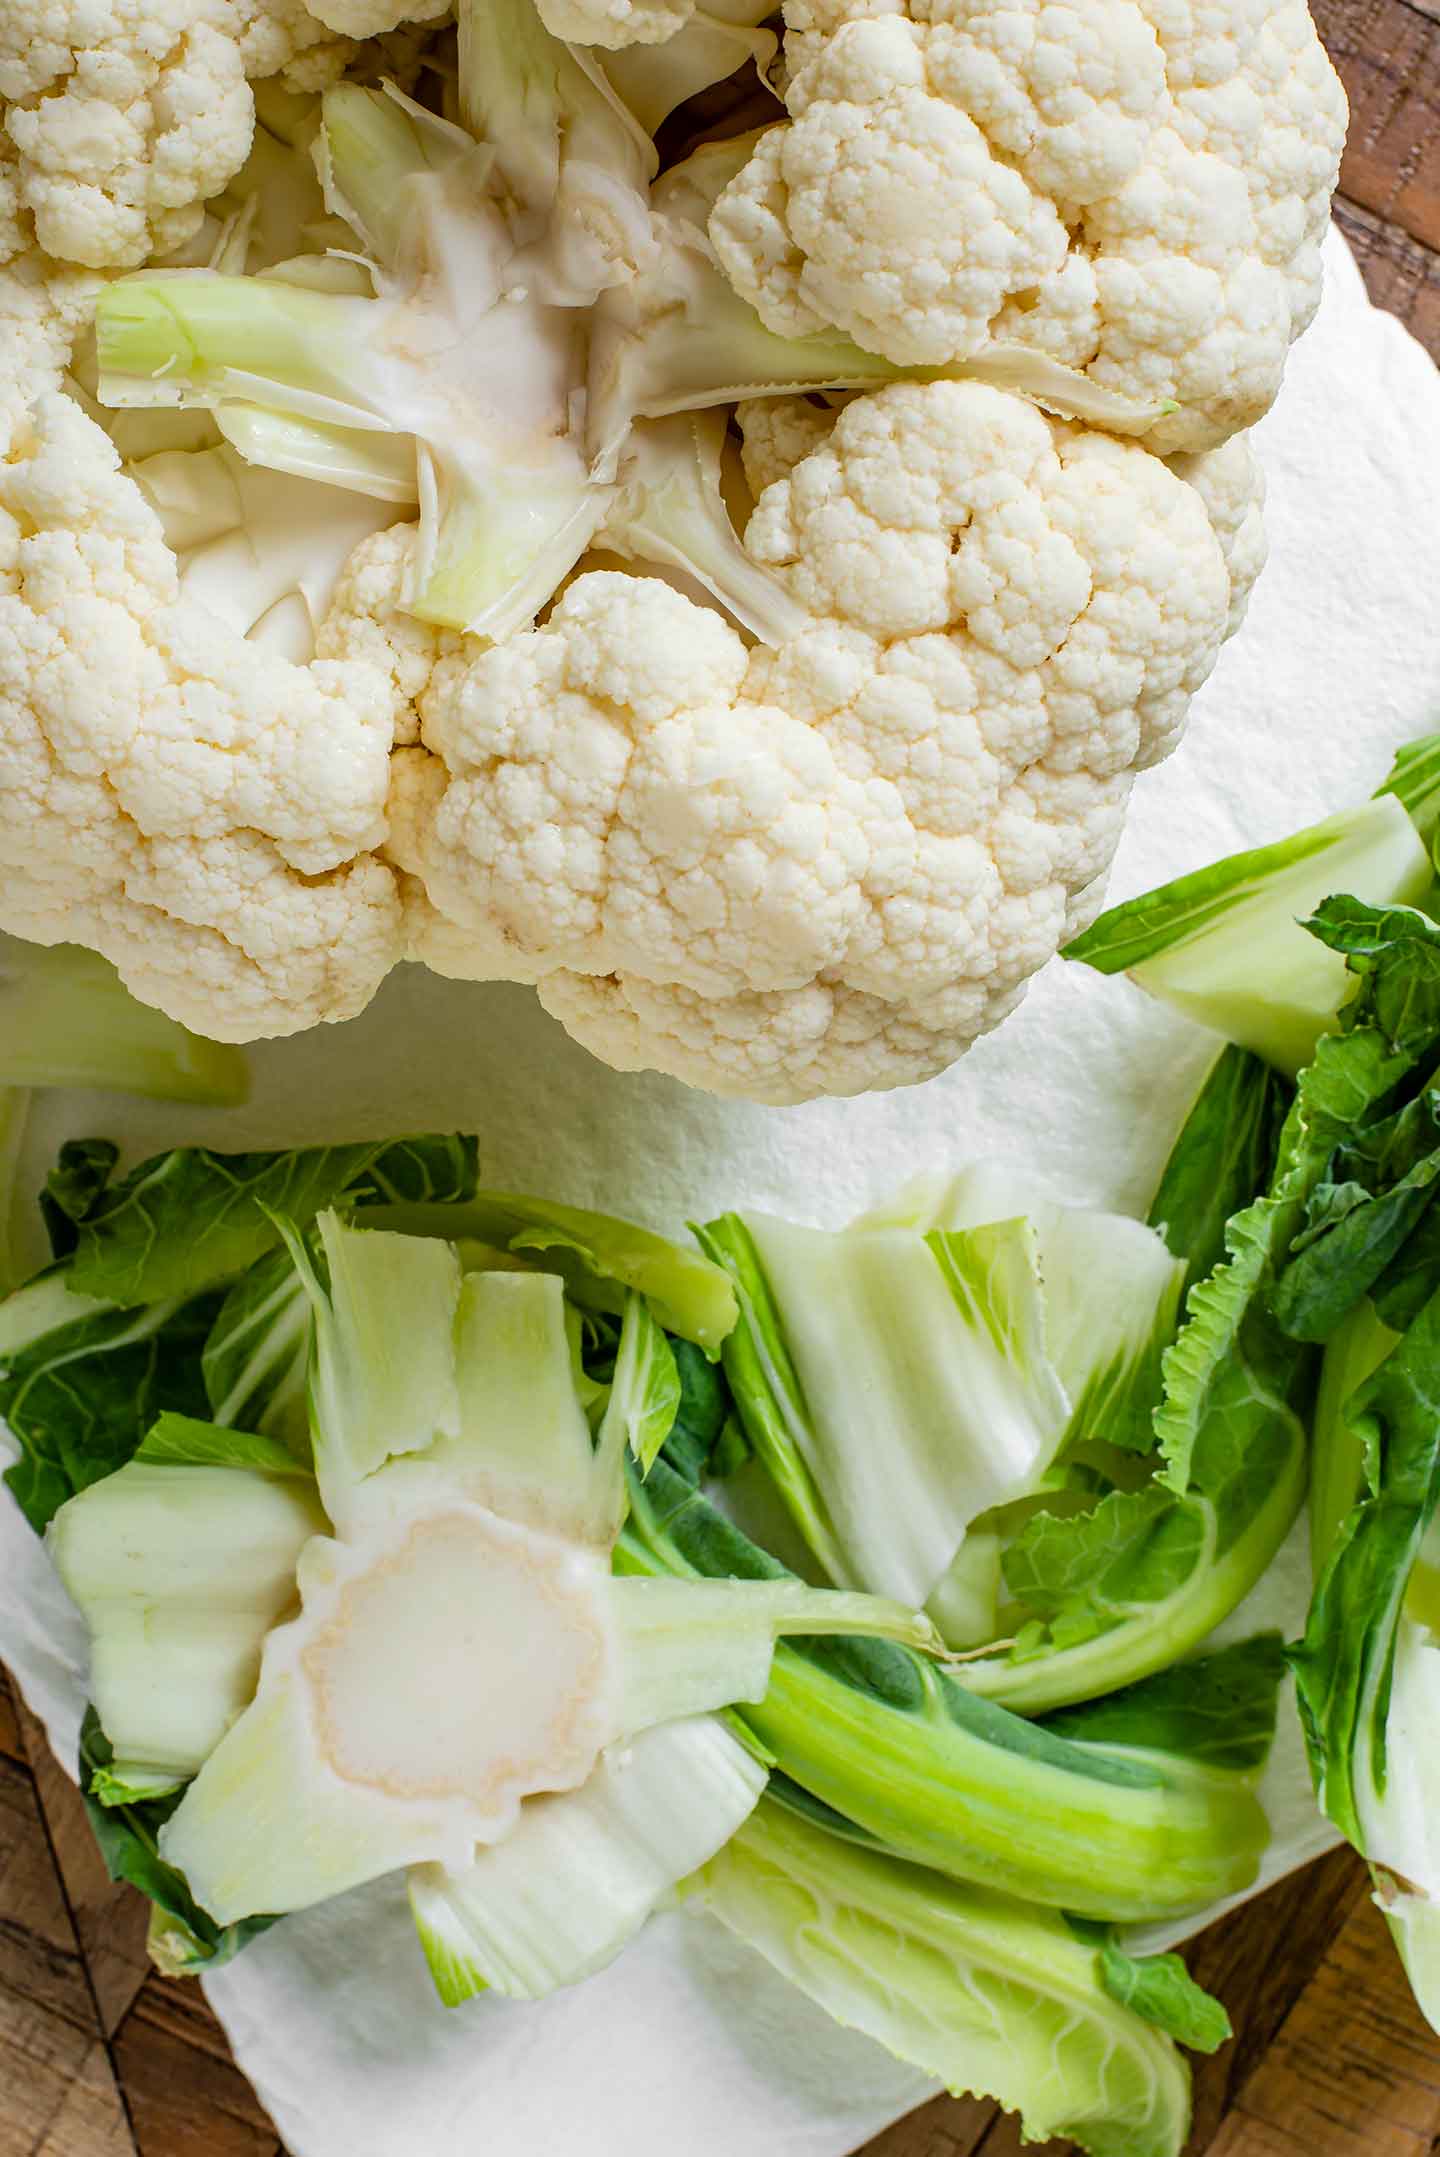 Top down view of a raw cauliflower turned on its head. The leaves and stem have been trimmed.